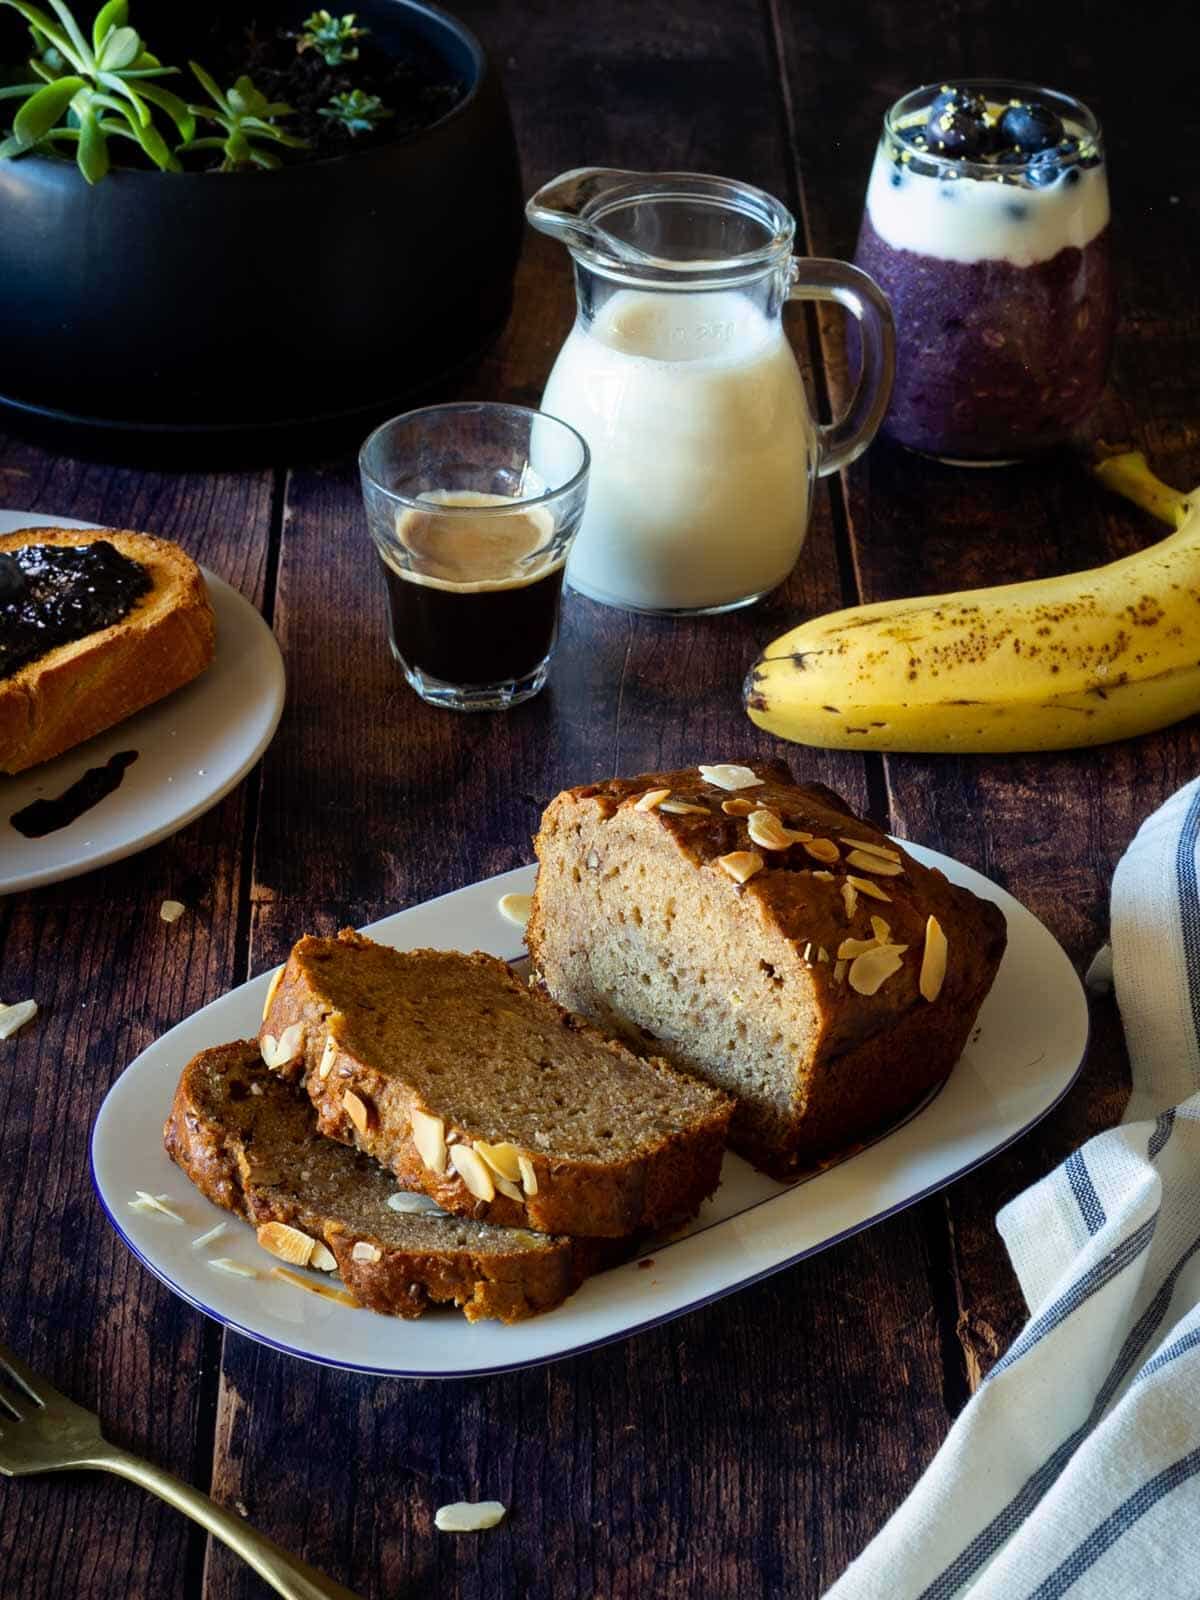 vegan banana bread in b reakfast table with coffee and blueberry toast